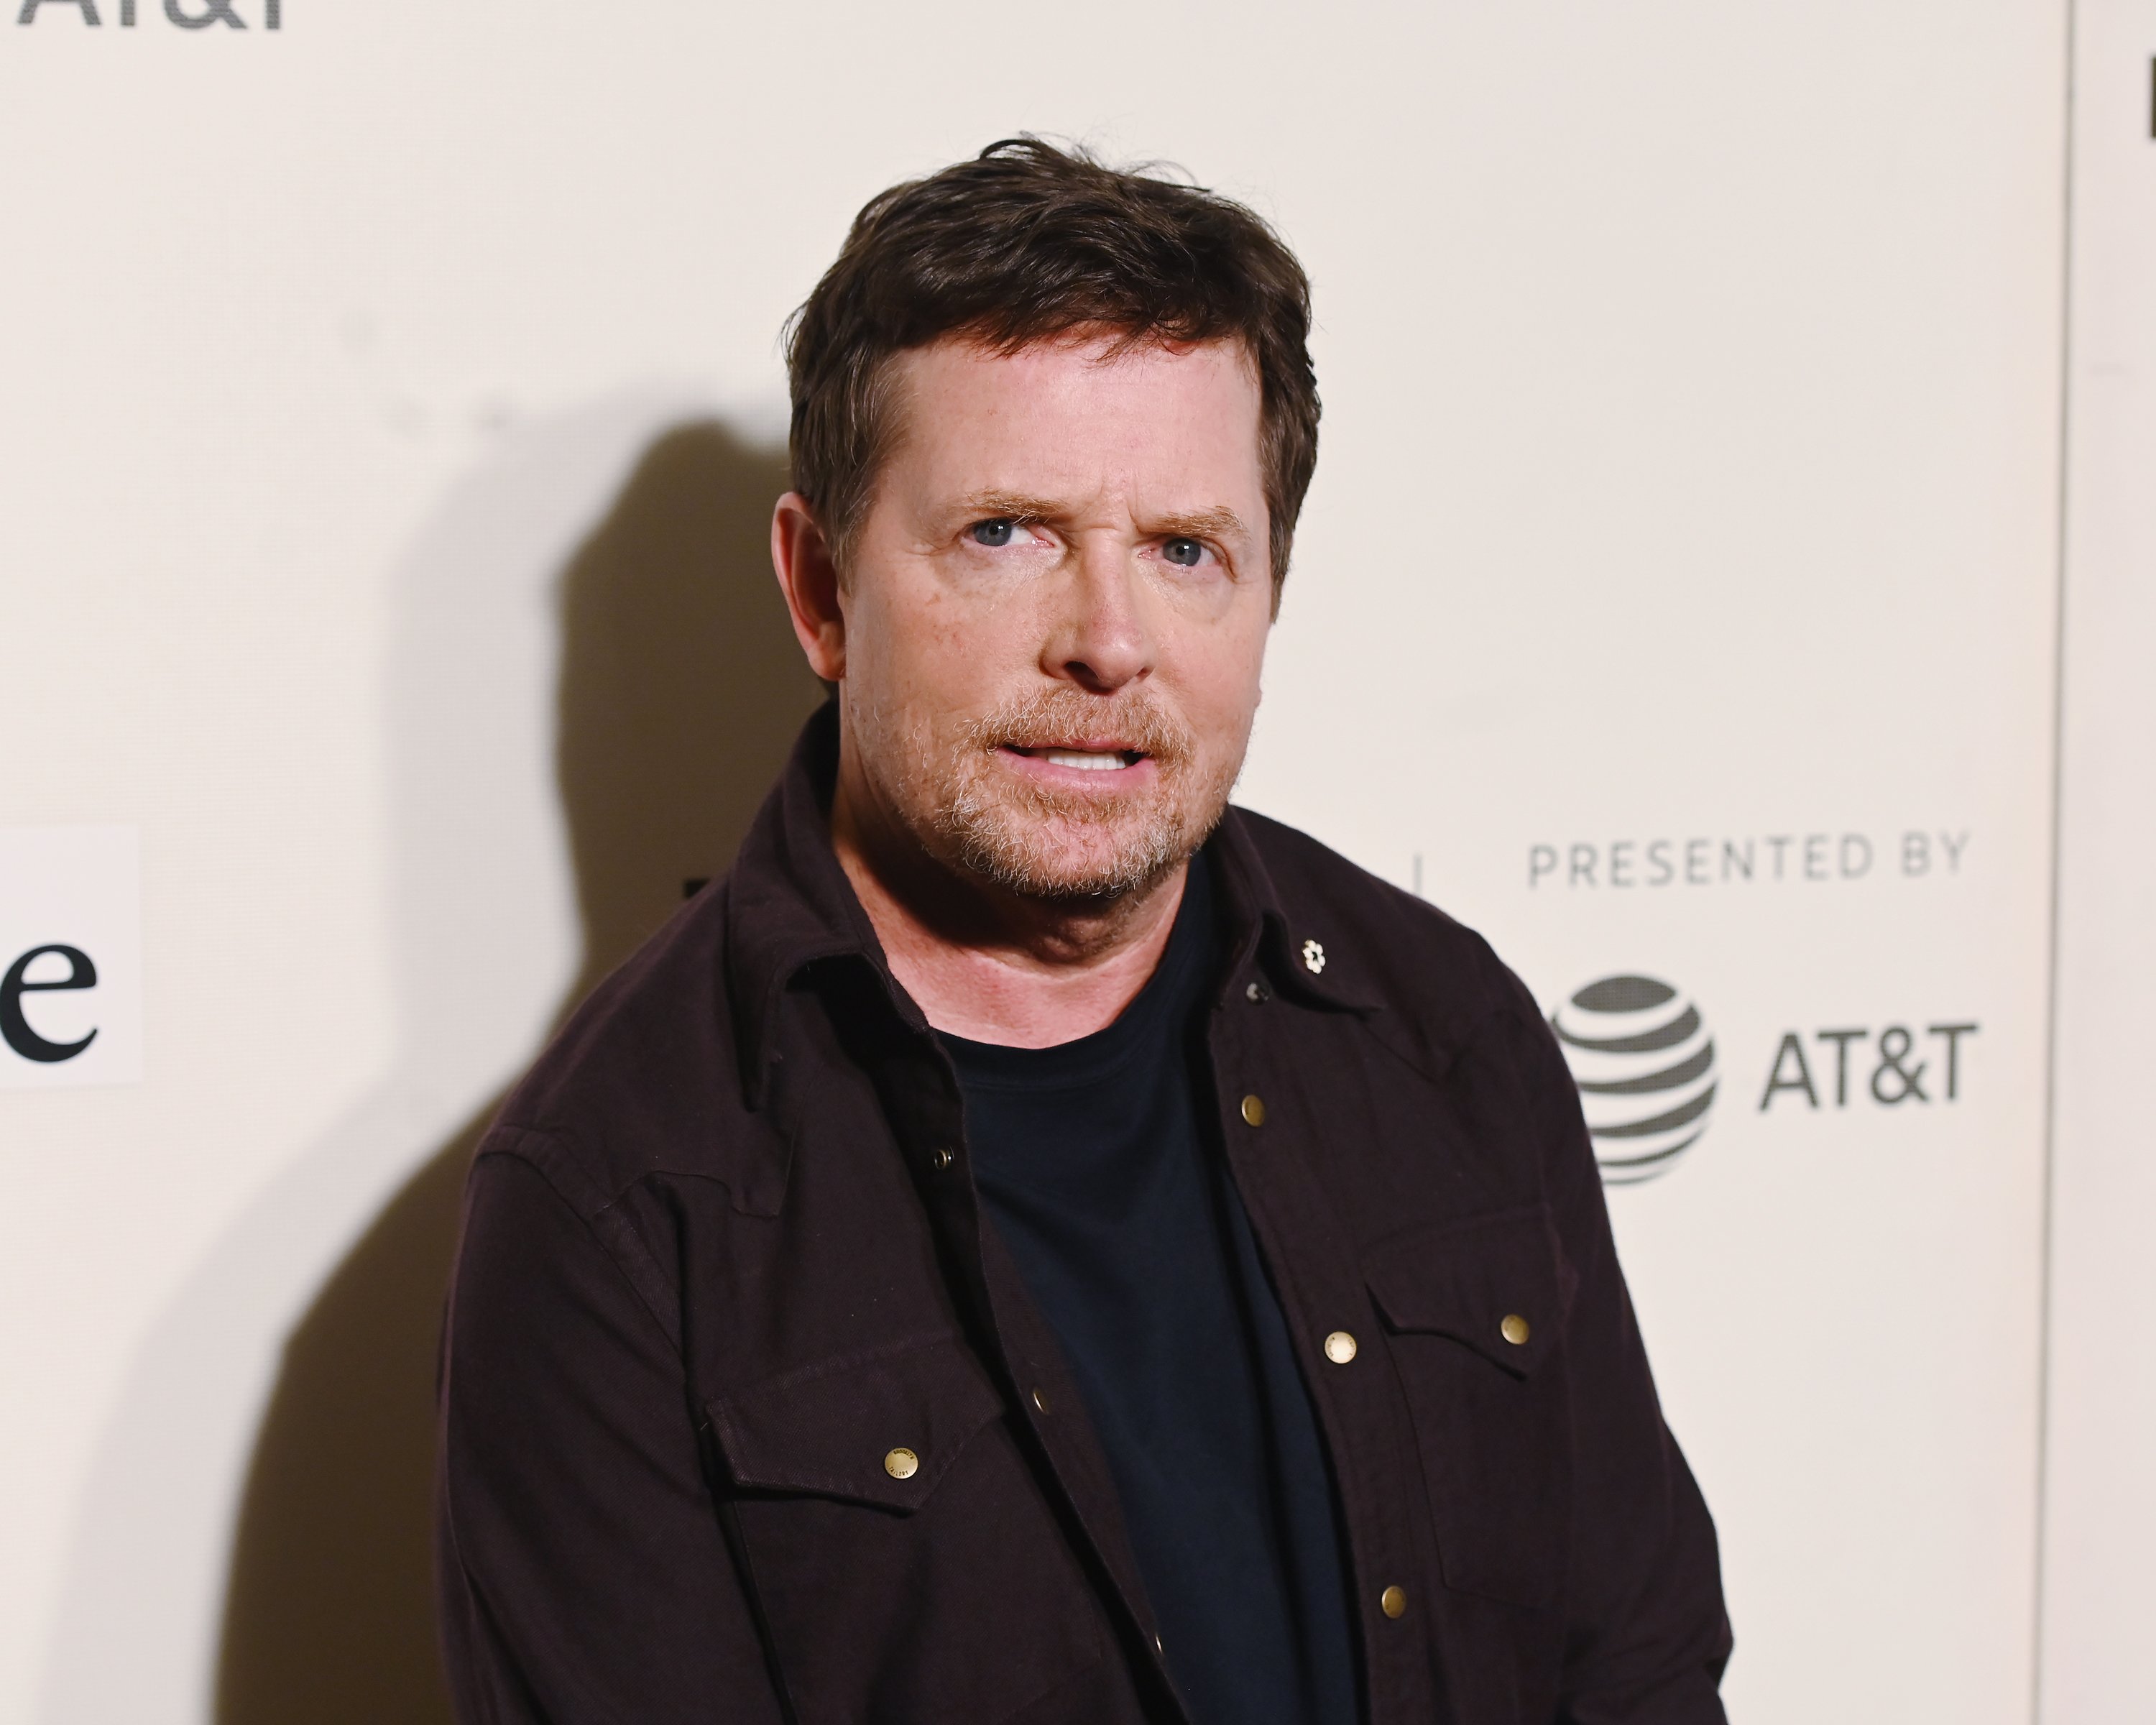 Michael J. Fox attends red carpet for the Tribeca Talks - Storytellers - 2019 Tribeca Film Festival at BMCC Tribeca PAC on April 30, 2019. | Photo: GettyImages